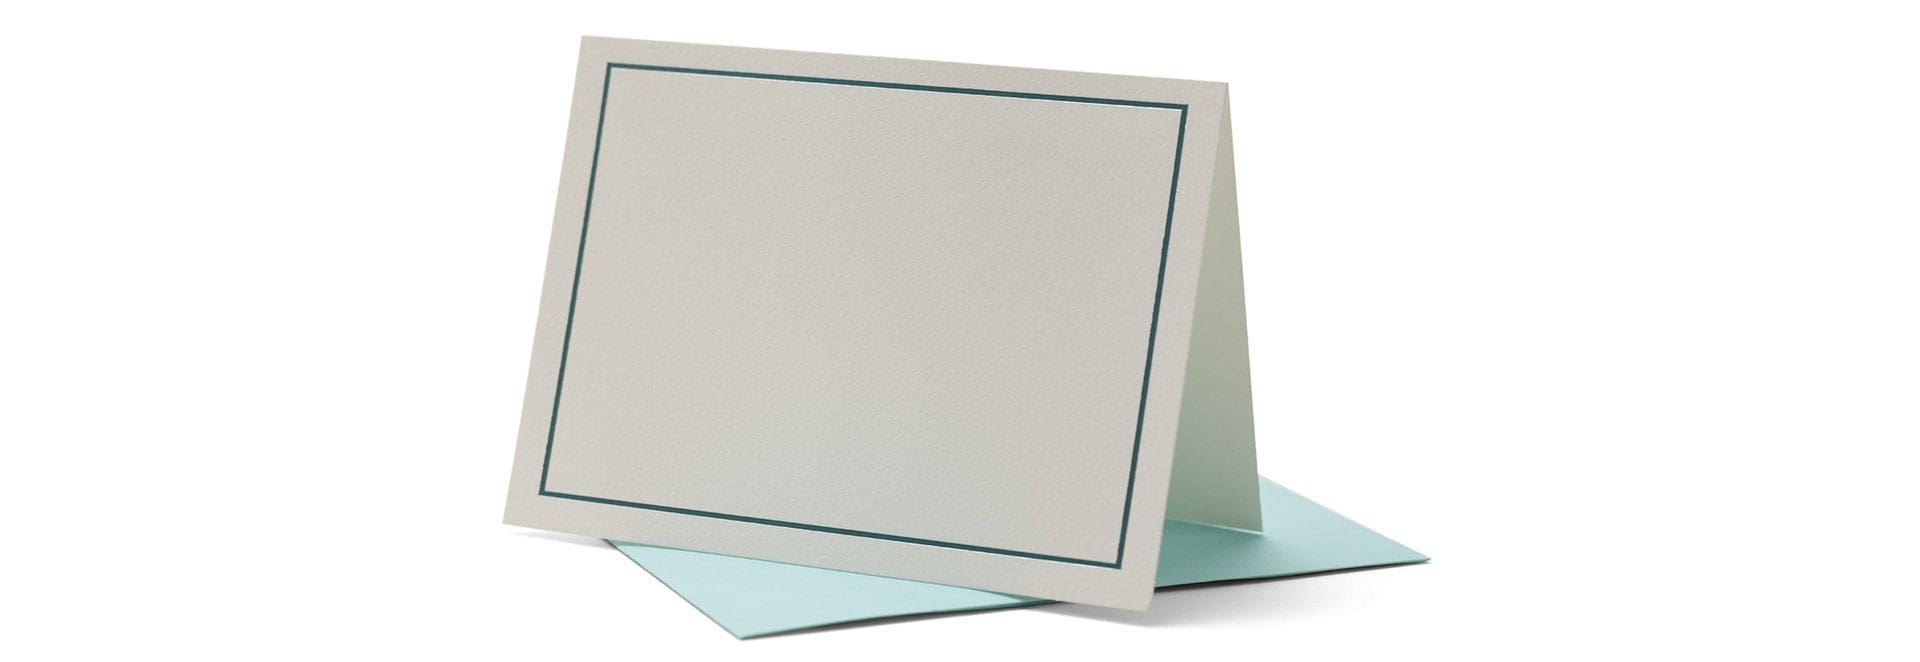 A white card with blue border on top of it.